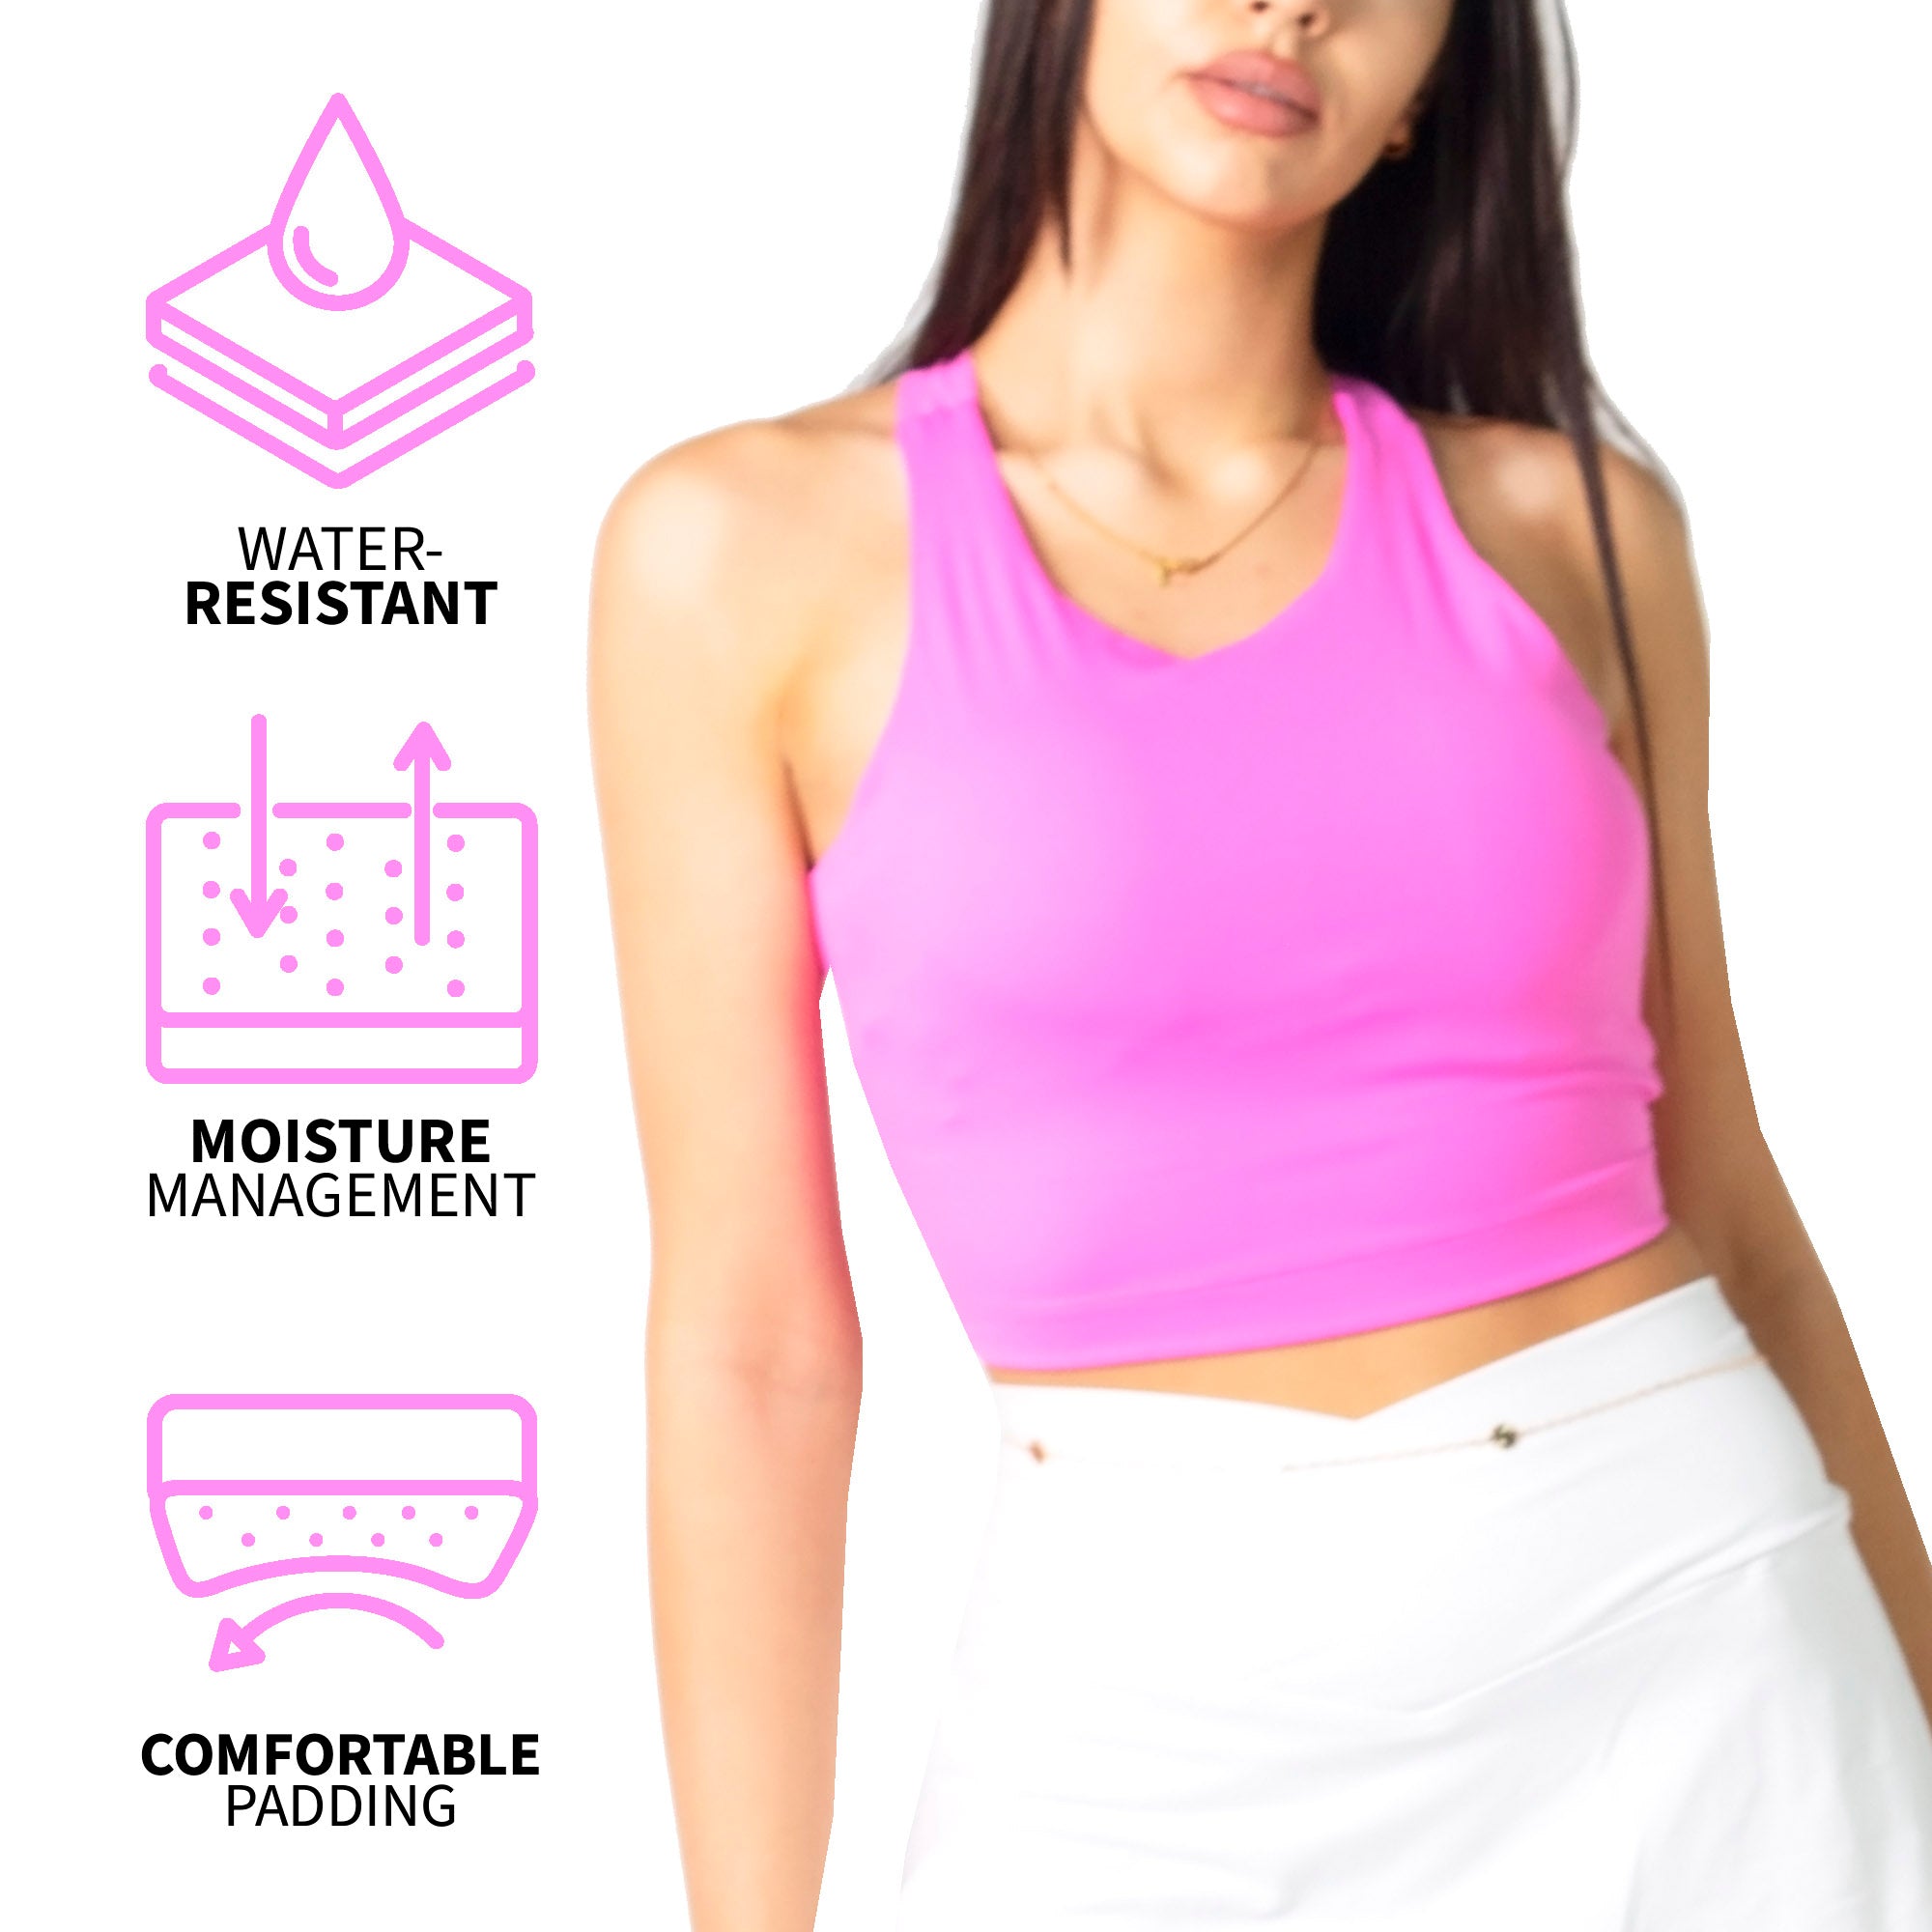 Buy NEON PINK TOP Womens Neon Pink Longline Sports Bra Neon Pink Cropped  Workout Top Crop Top Bright Pink Sports Bra Running Gym Online in India 